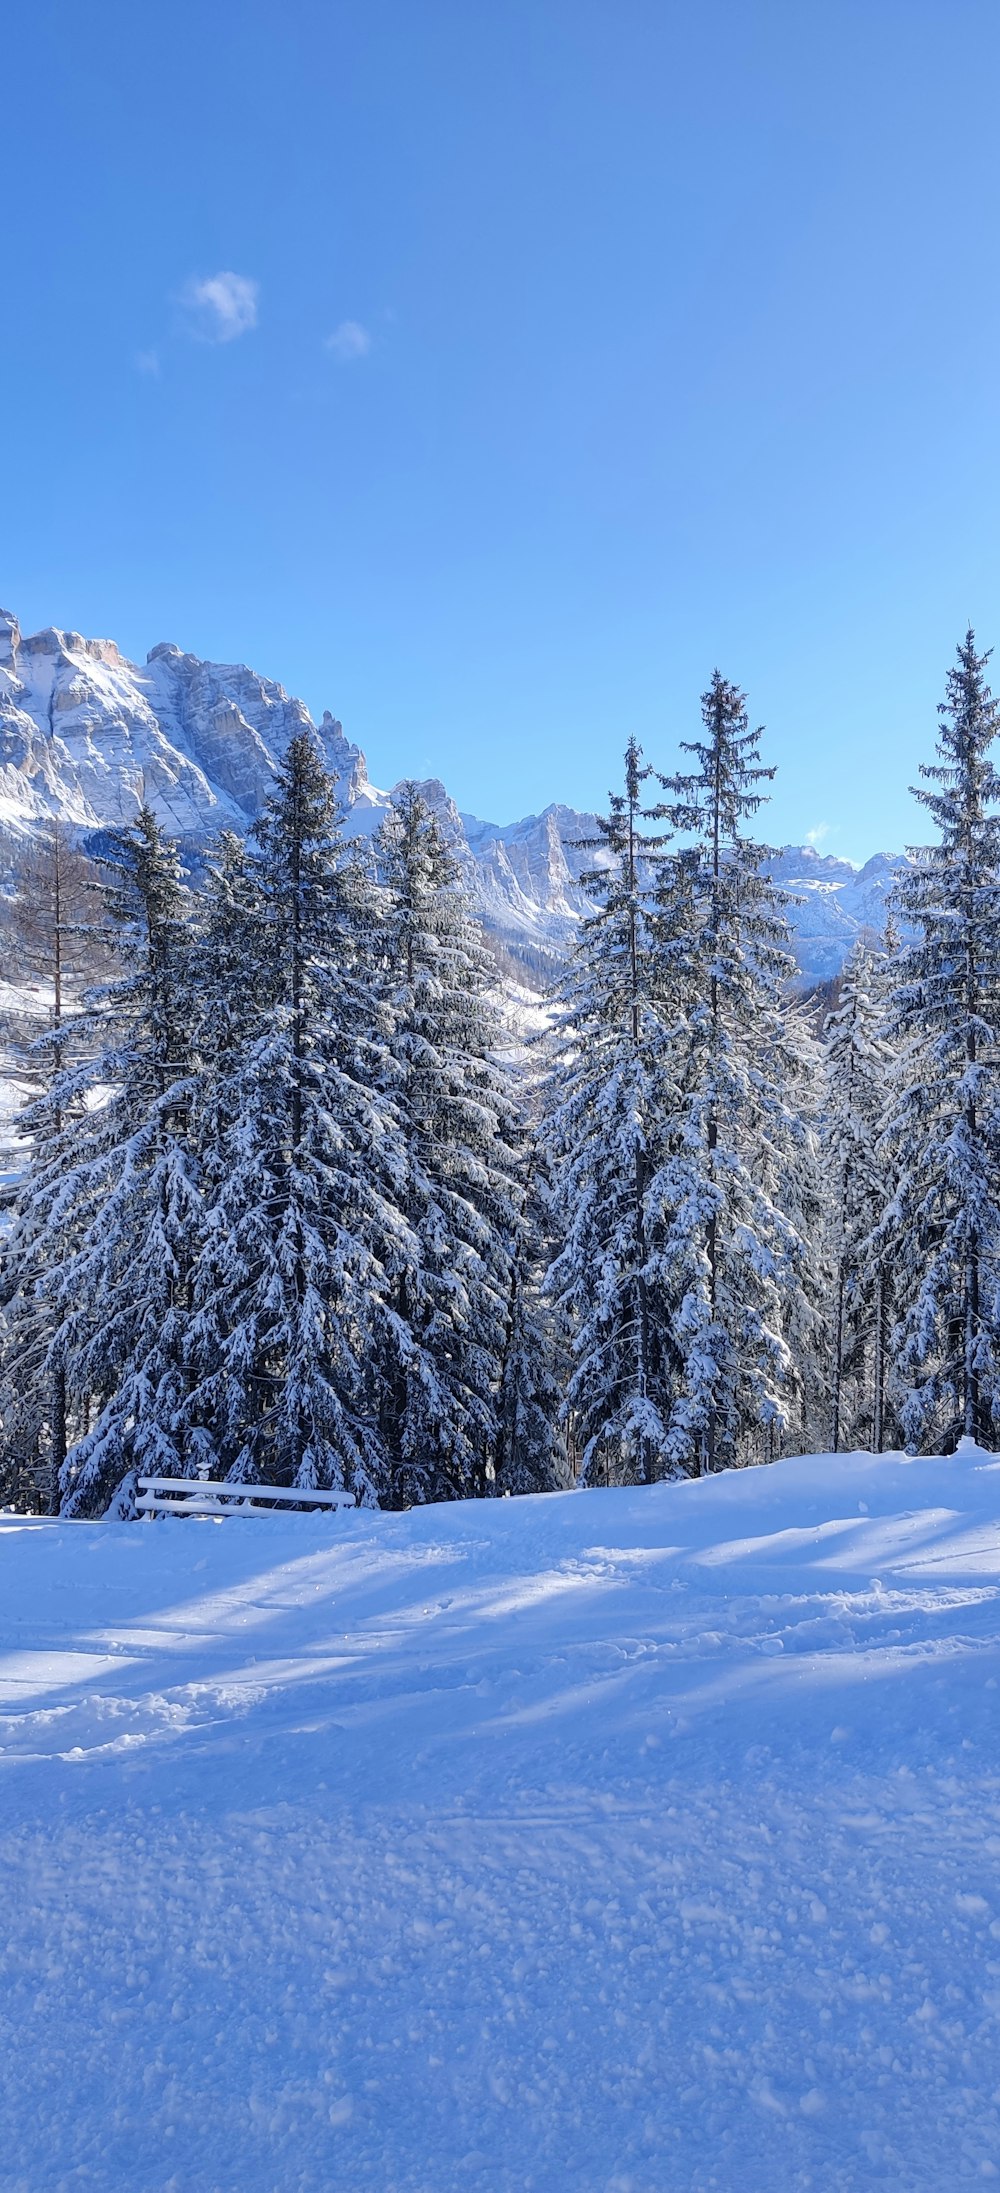 a snowy landscape with trees and mountains in the background